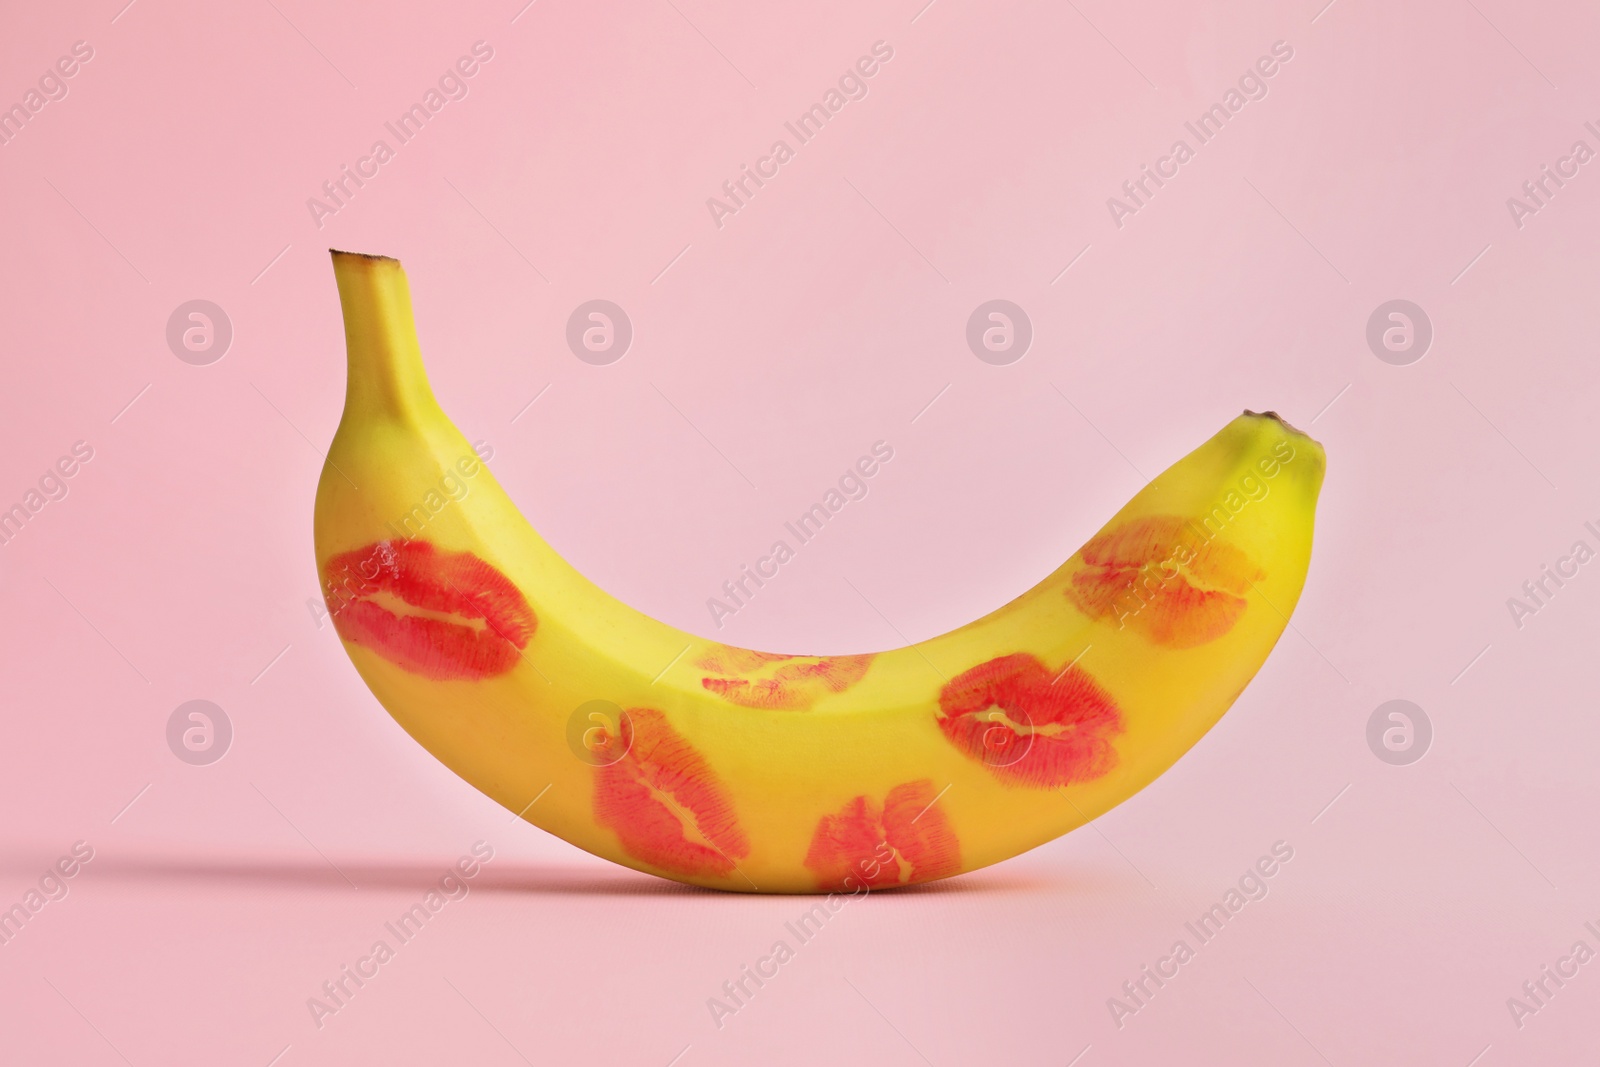 Photo of Banana covered with red lipstick marks on light pink background. Potency concept